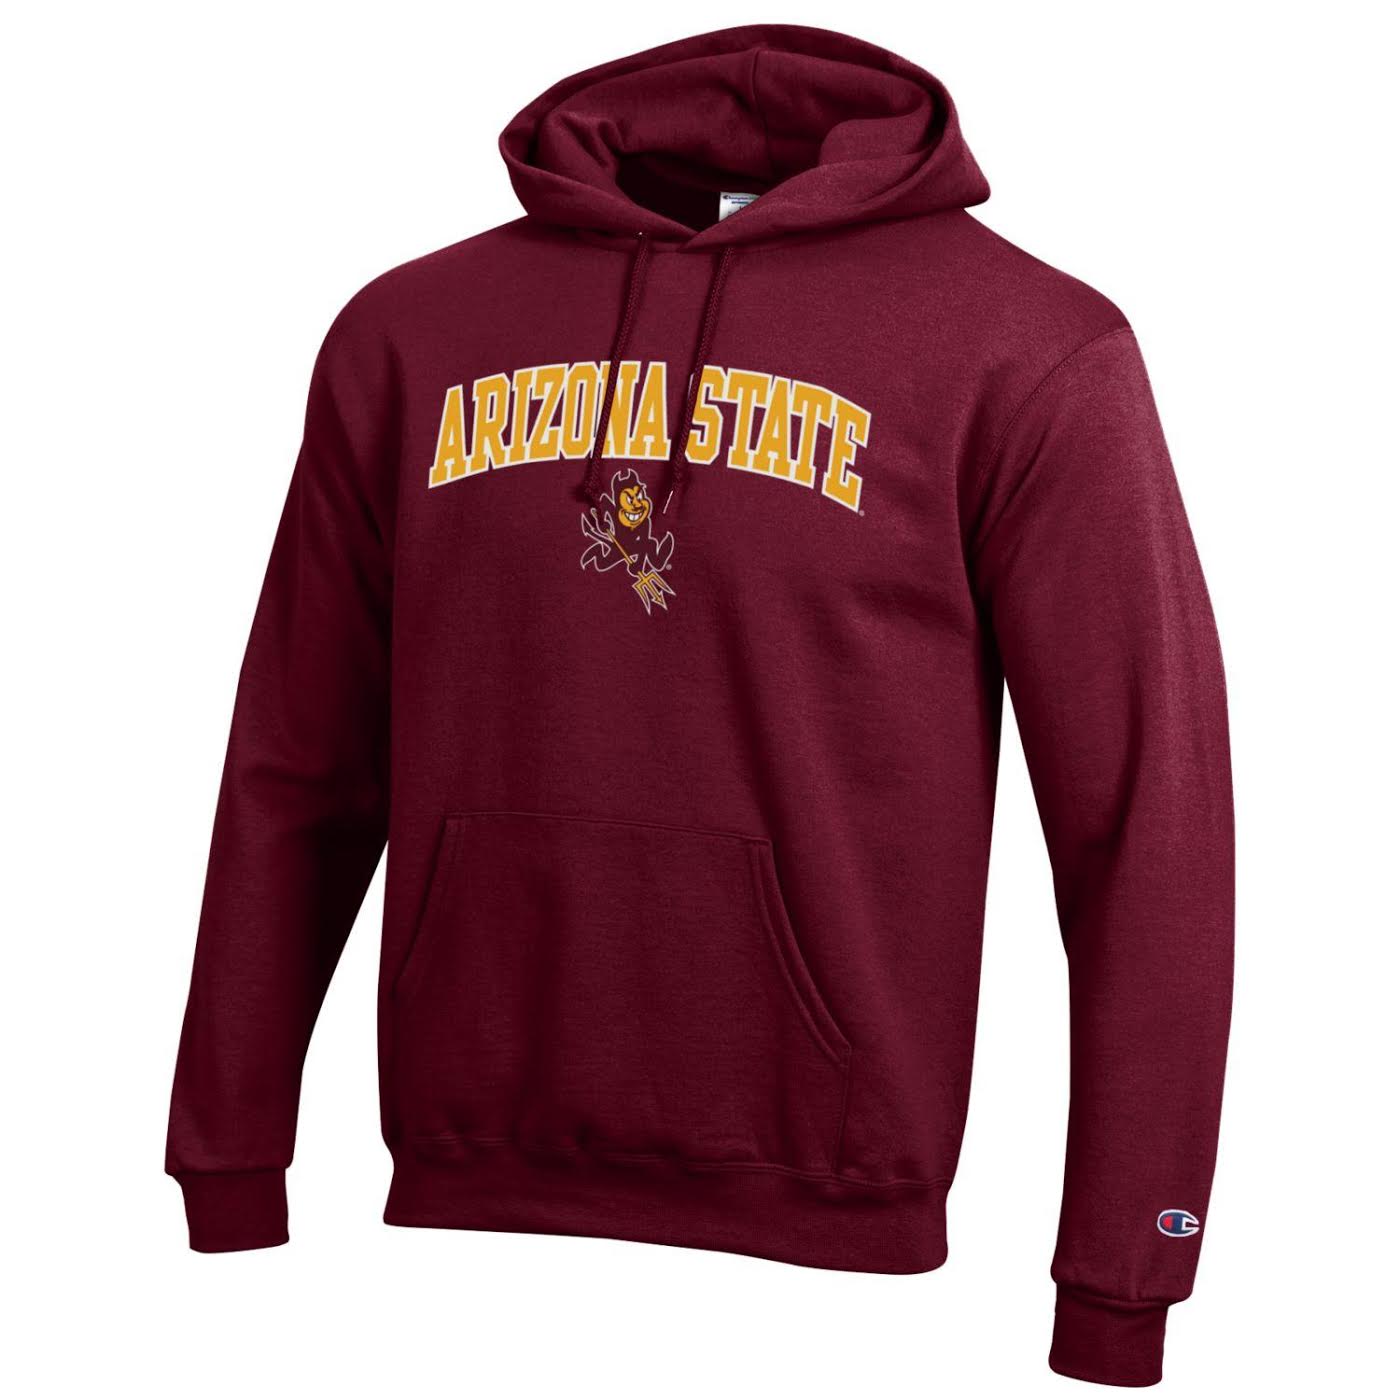 ASU maroon Champion hoody with single front pocket and 'Arizona State' arched over Sparky